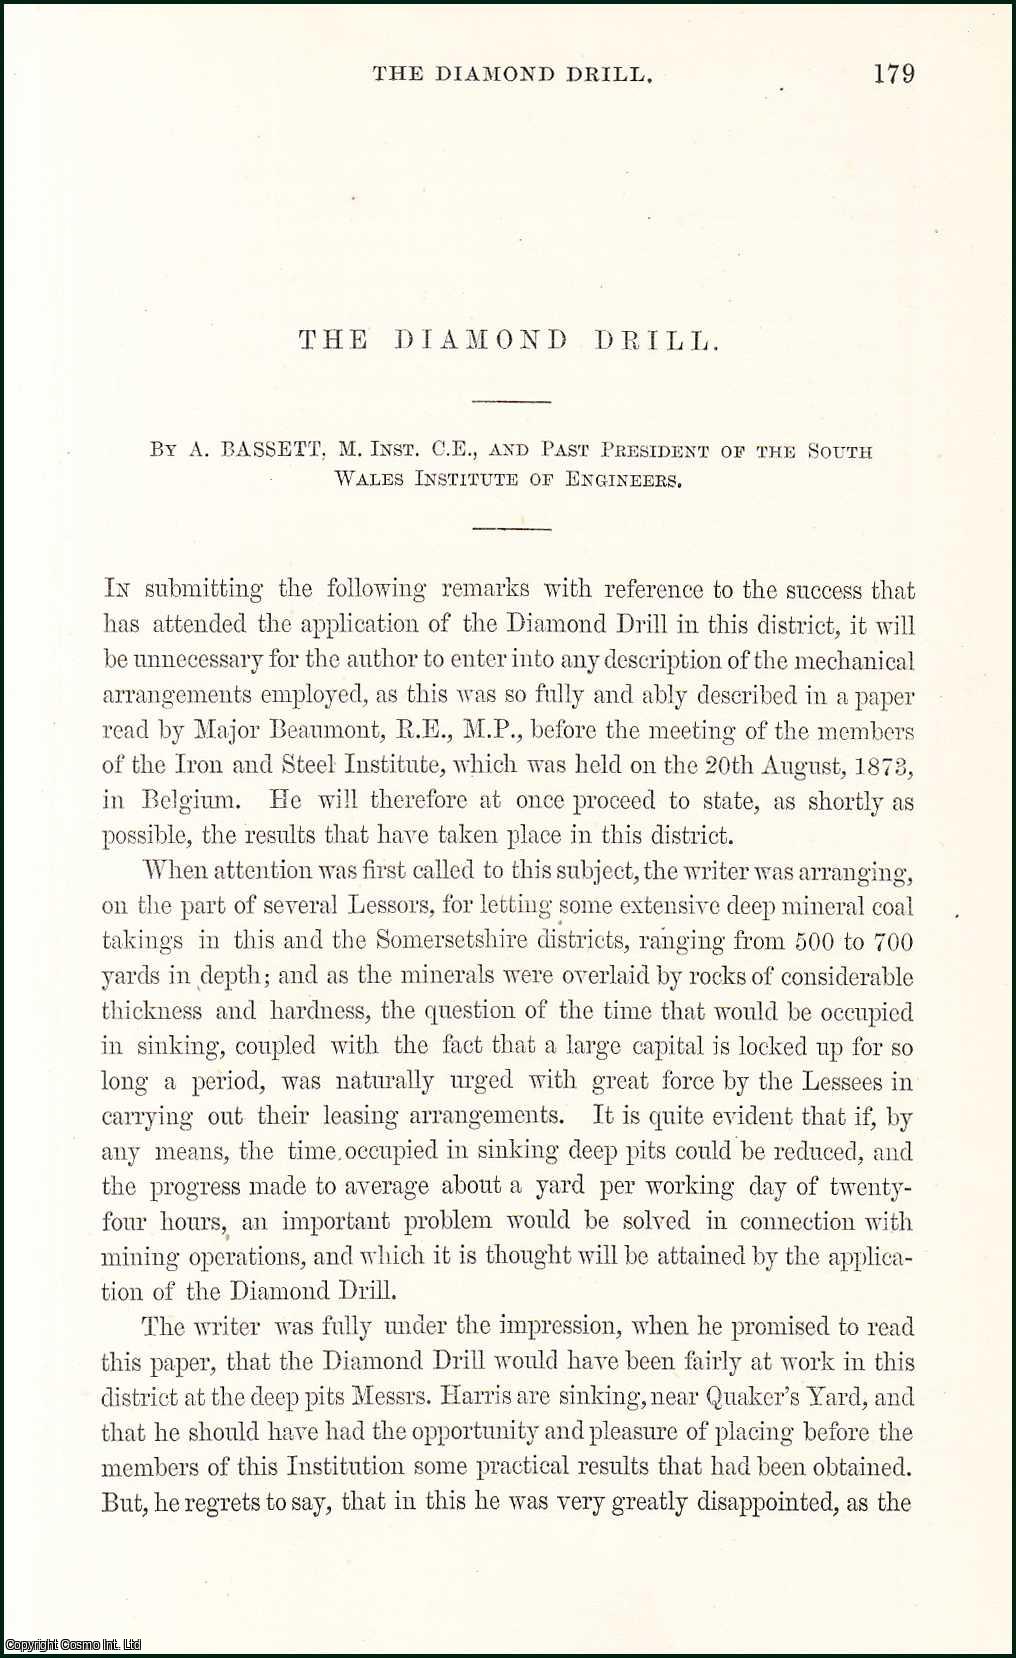 A. Bassett, M. Inst. C.E., & Past President of the South Wales Institute of Engineers. - The Diamond Drill. An original article from the Transactions of the North of England Institute of Mining Engineers, 1874.